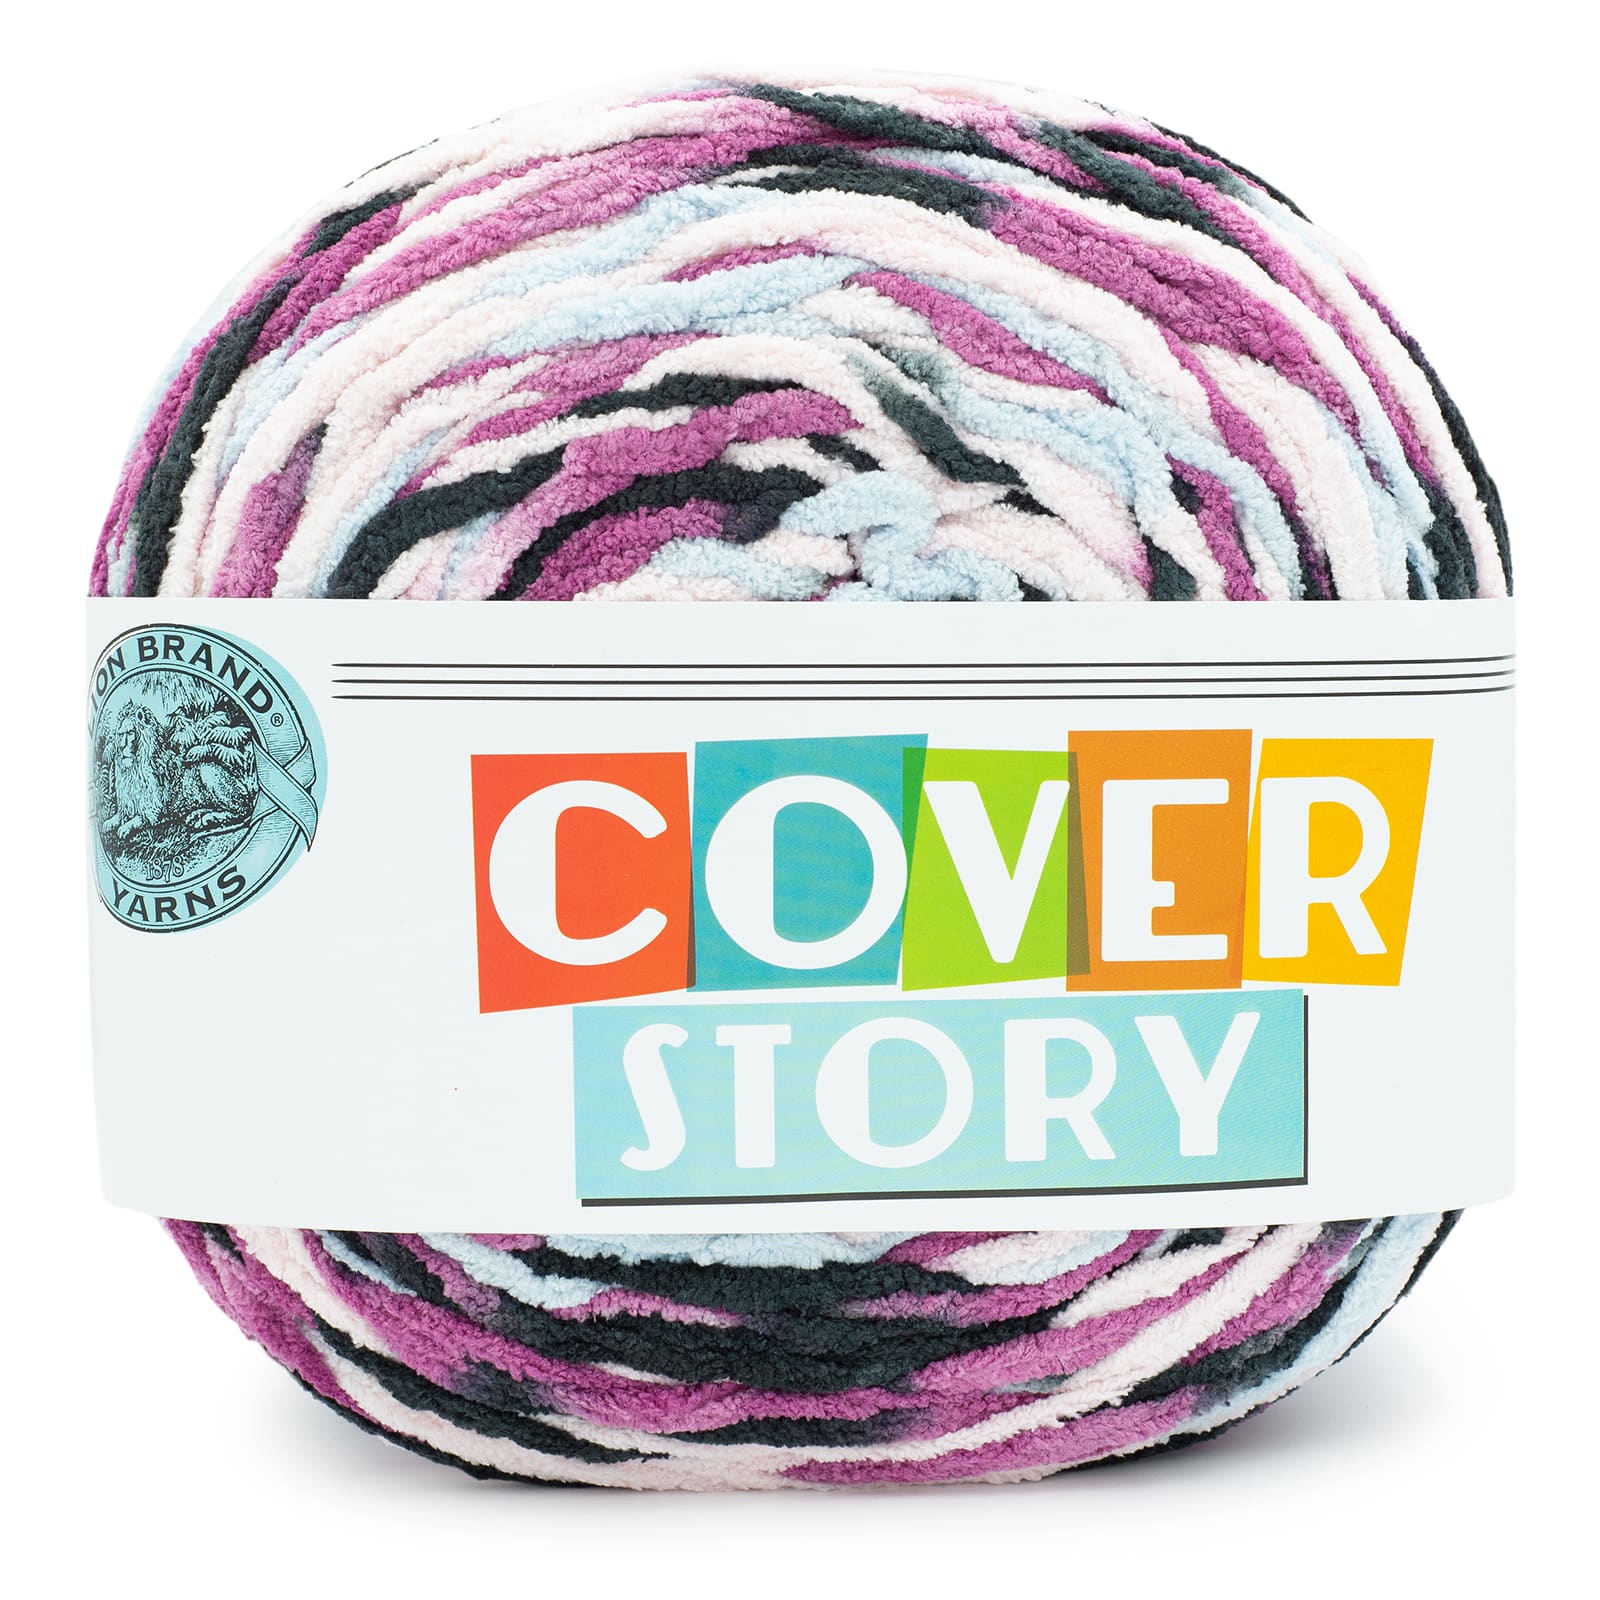 NEW Yarn Review - Lion Brand Cover Story Super Bulky Yarns 